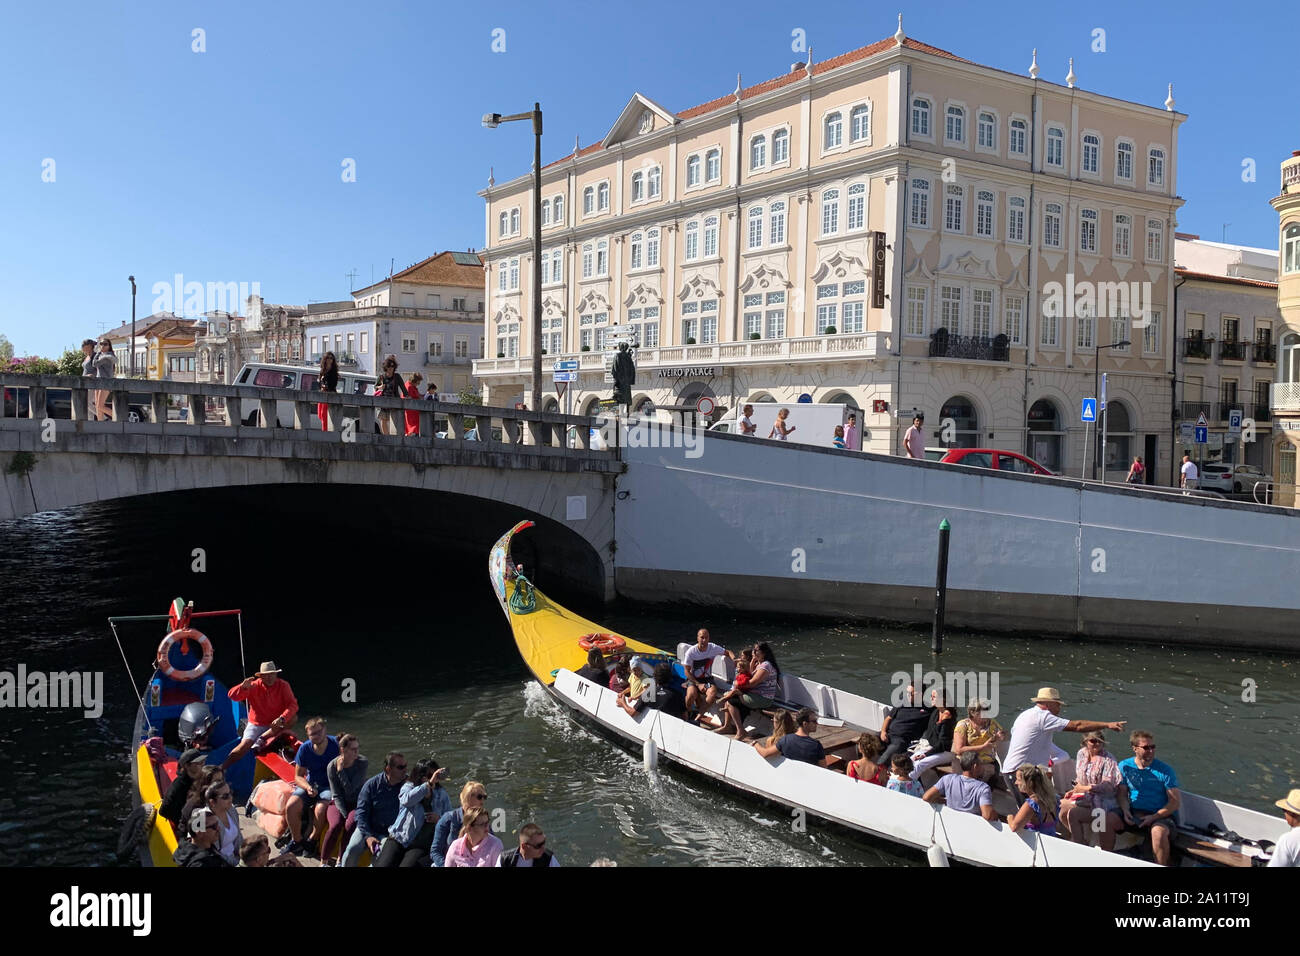 September 2019, City of Aveiro - Portugal, Traditional Moliceiro boats with hand painted bows. Stock Photo